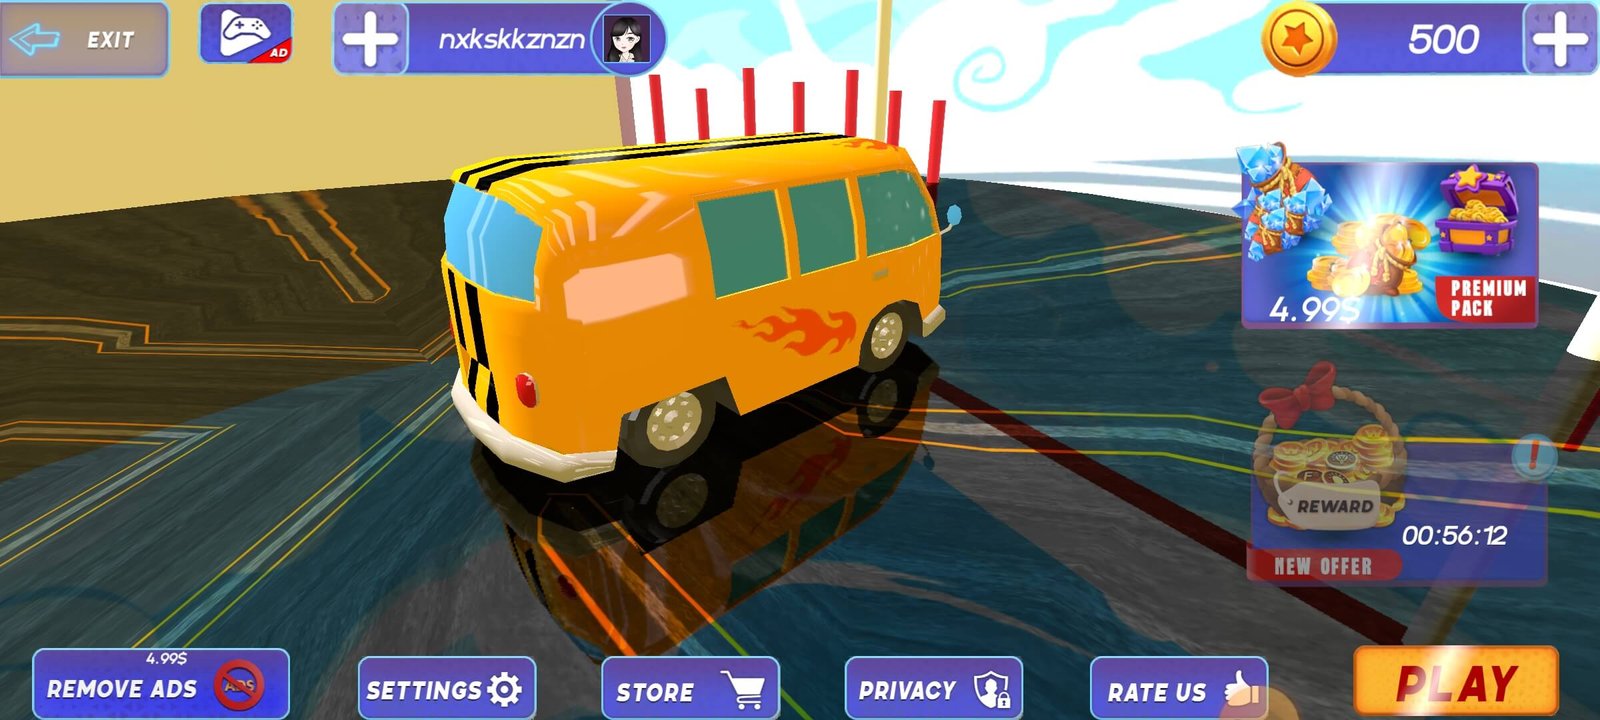 Toon Car Stunt Driving 3D Game